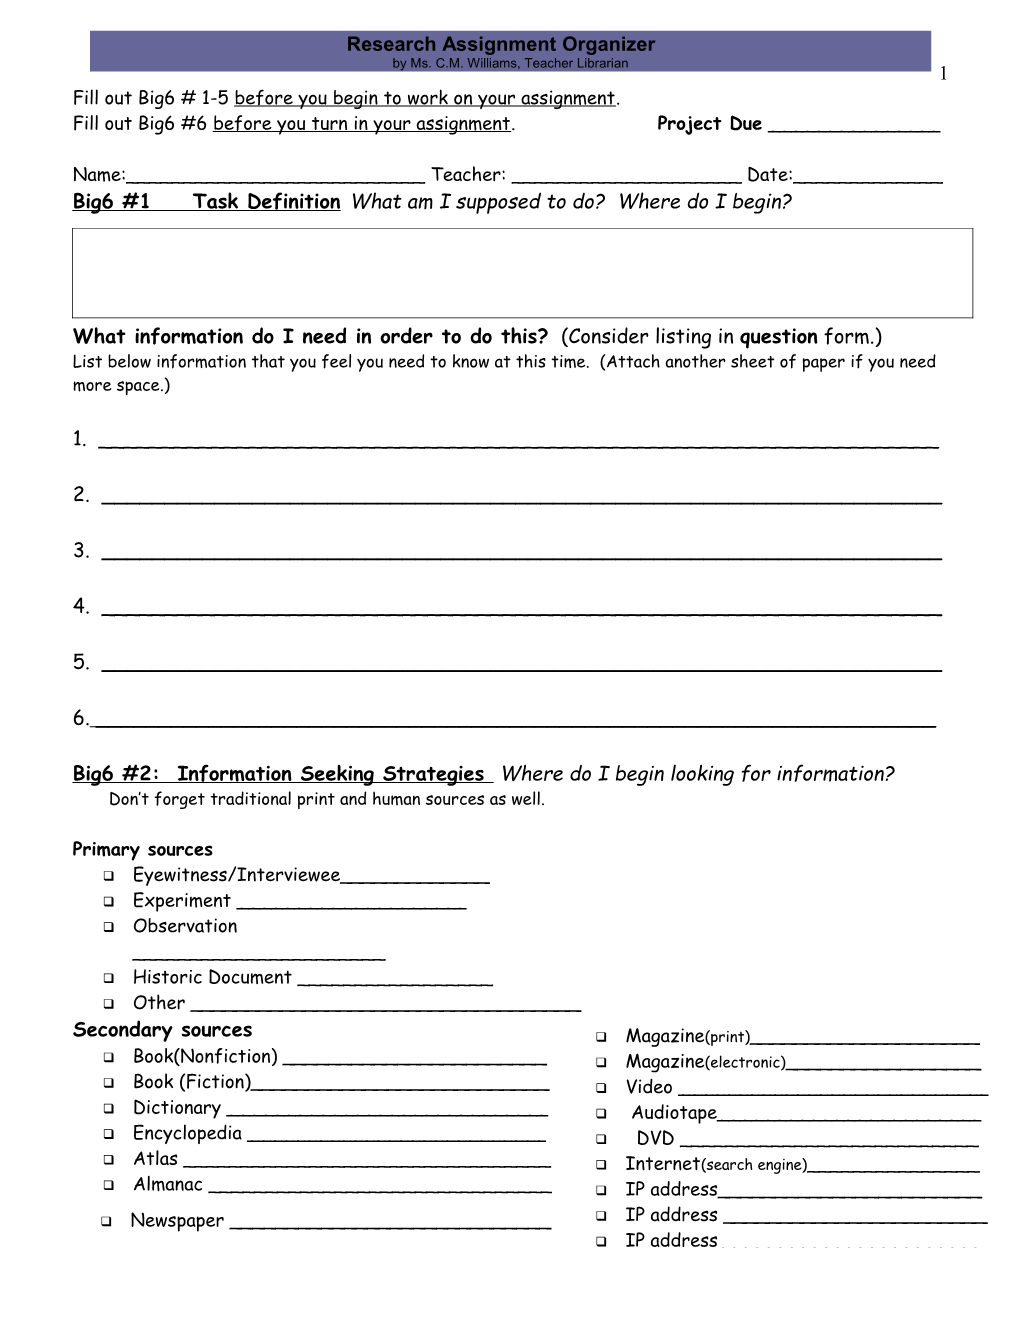 Research Assignment Organizer